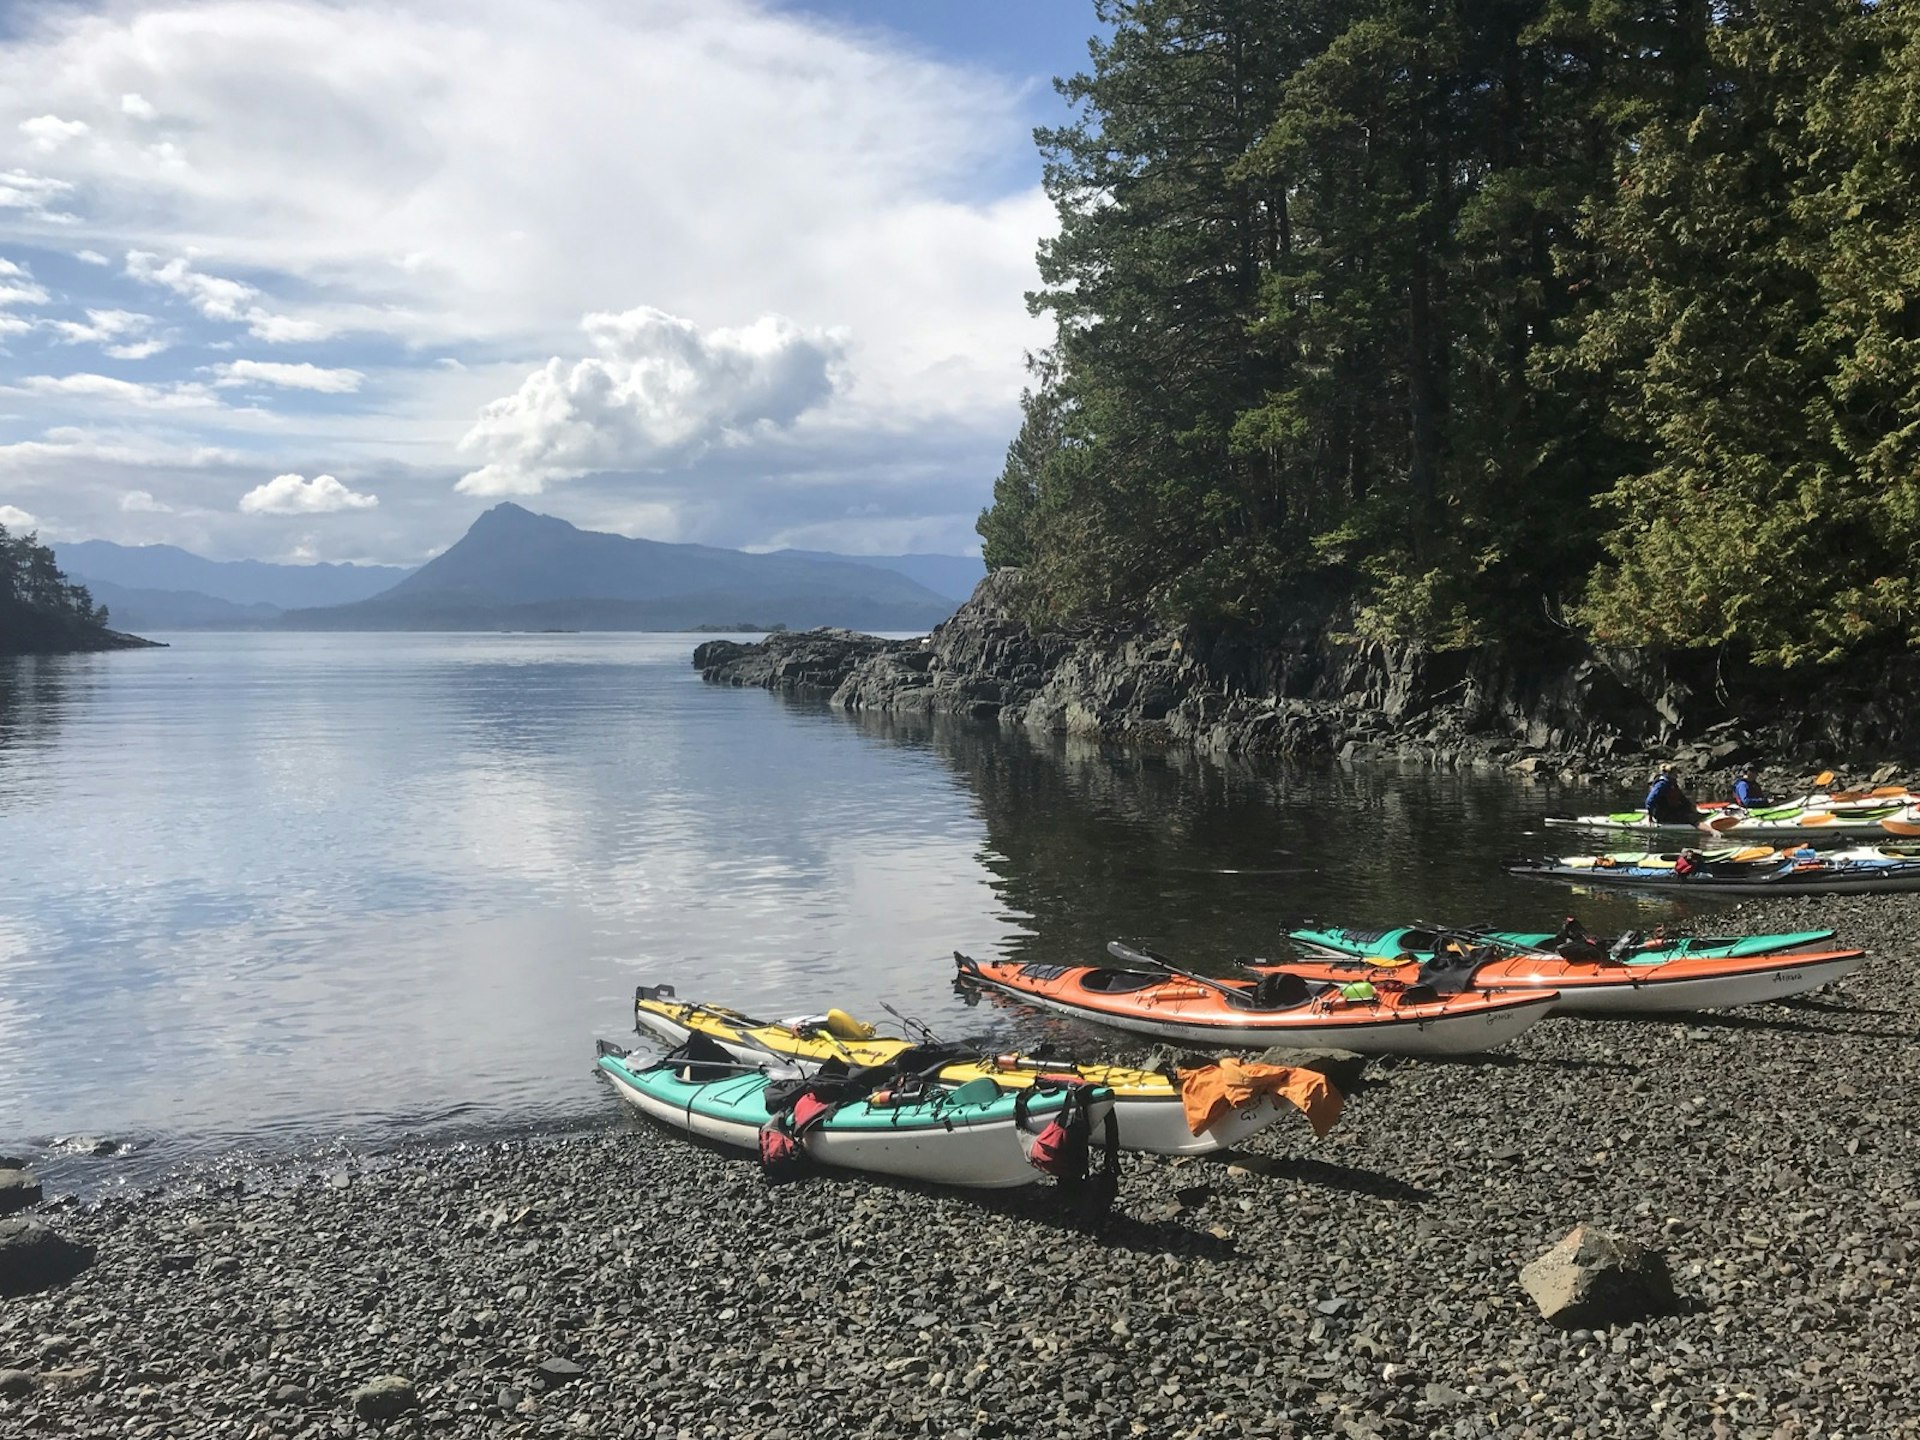 A row of kayaks are pulled onto a rocky beach as the beautiful scenery of British Columbia stretches out beyond.